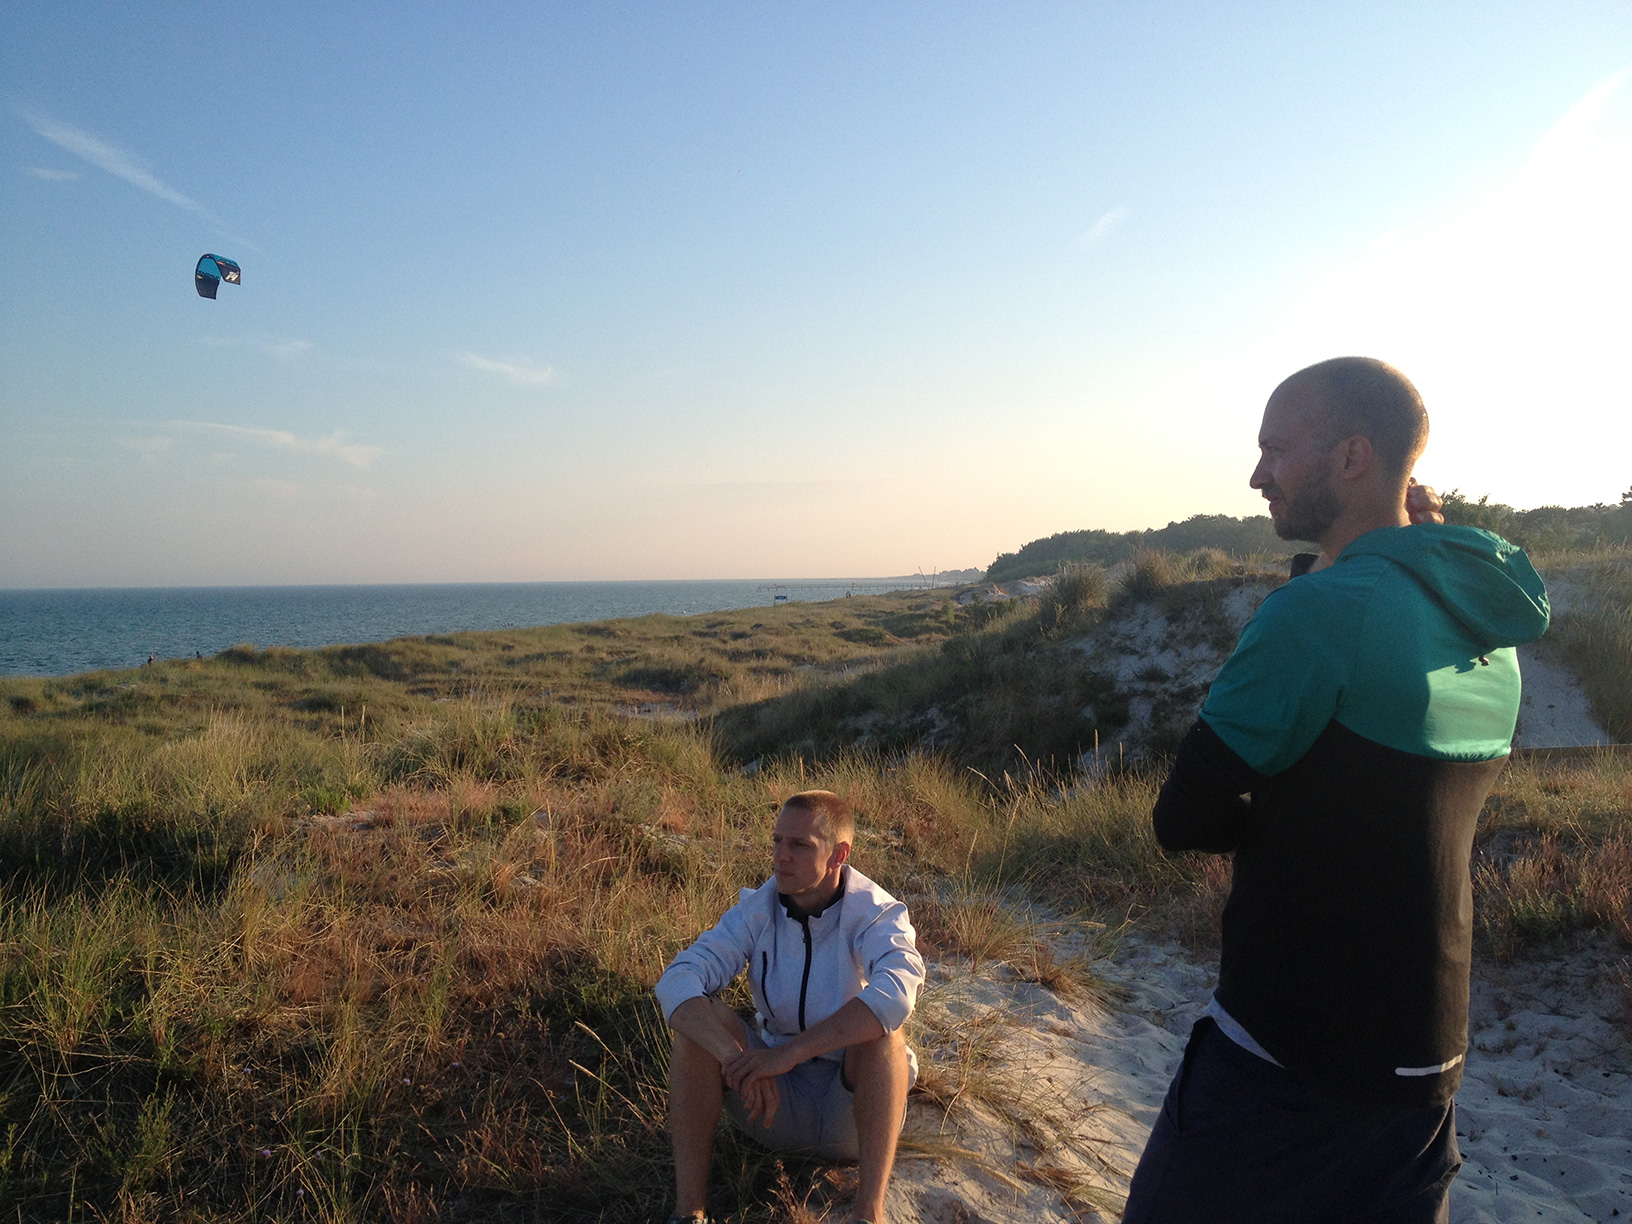 Aftersurf at Falsterbo